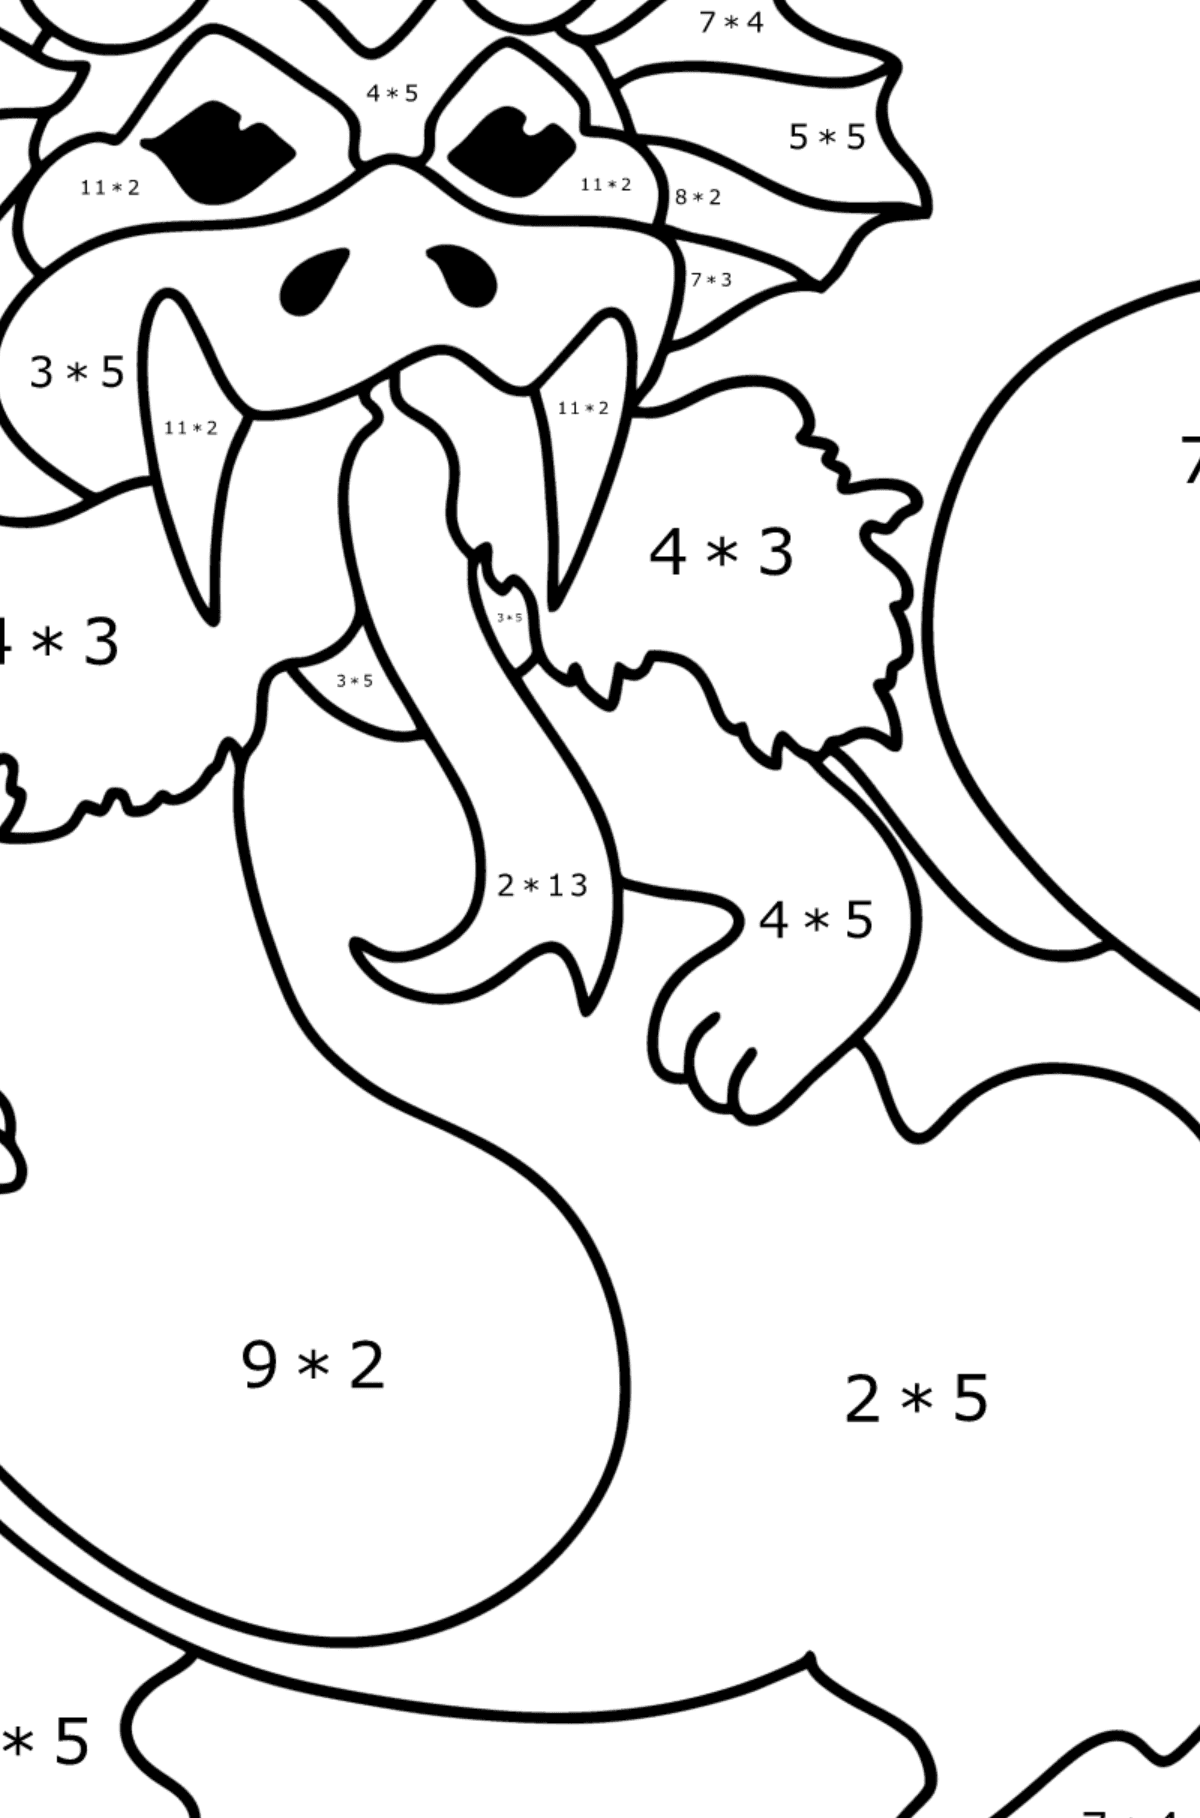 The dragon starts fire coloring page - Math Coloring - Multiplication for Kids